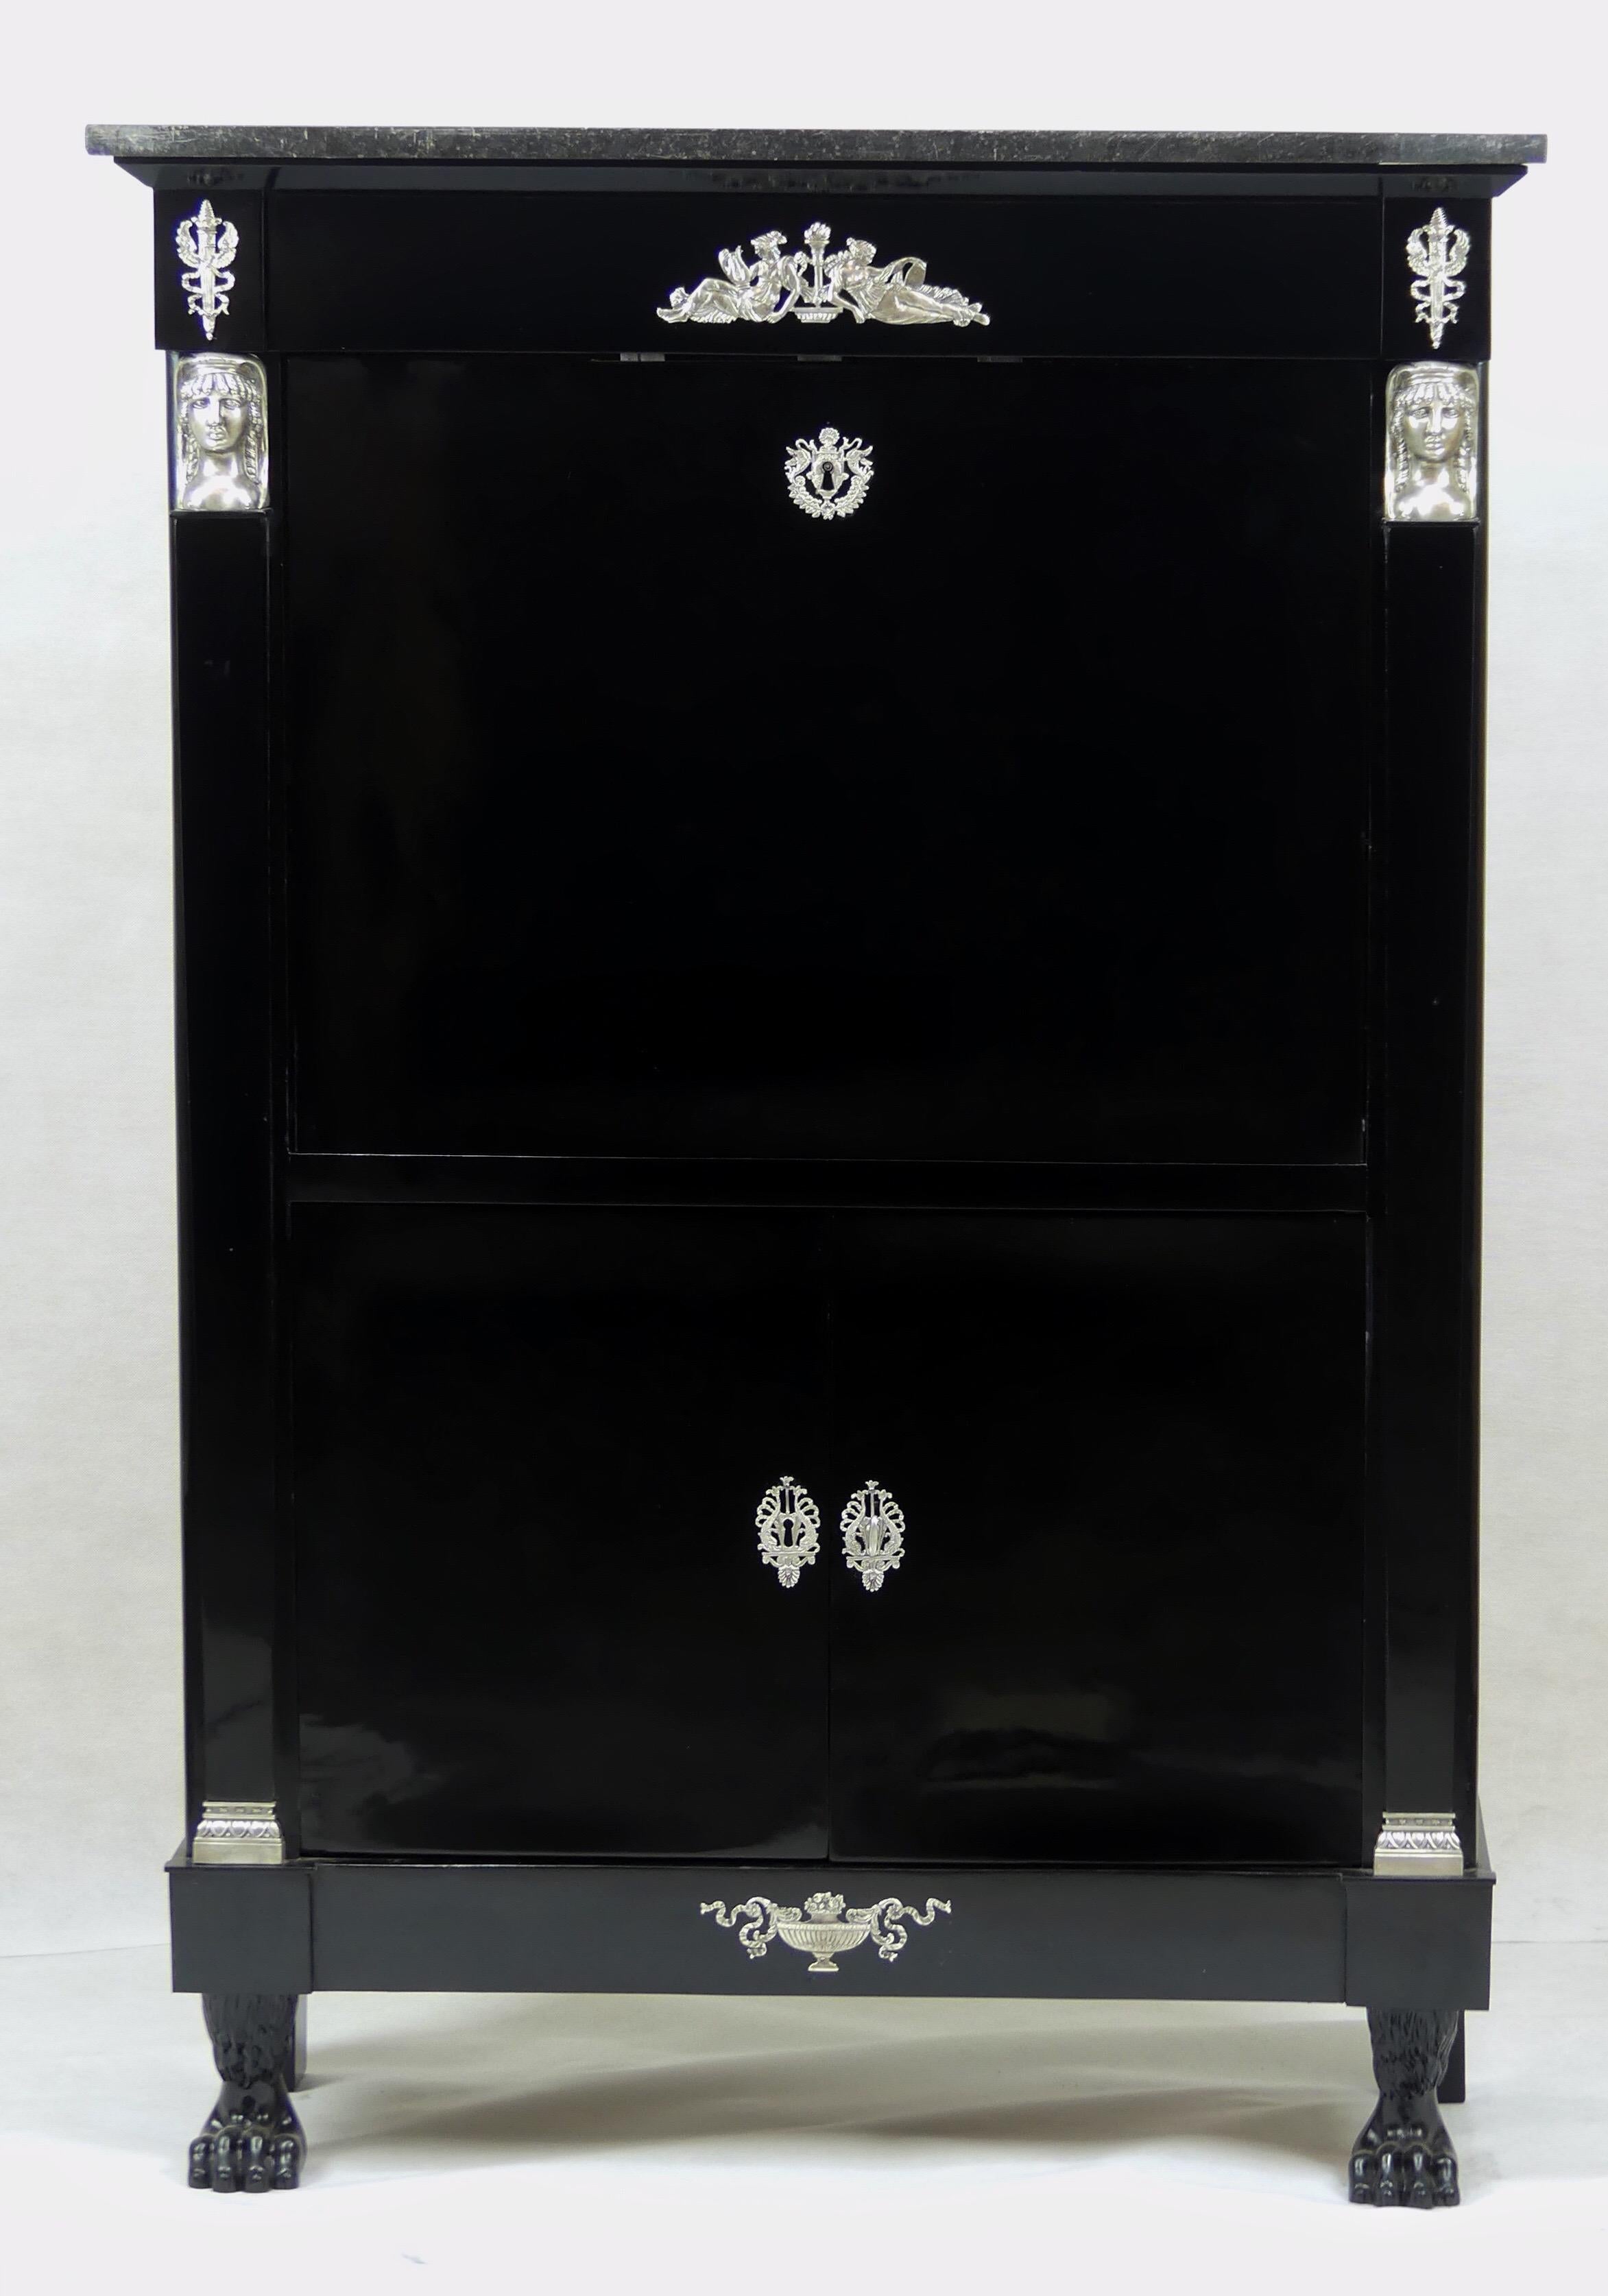 An original antique Empire secretary from the early 19th century from France. The secretary is ebonized and has wonderful silver plated fittings.

The secretary has two main compartments and an original marble top. The first compartment covers the